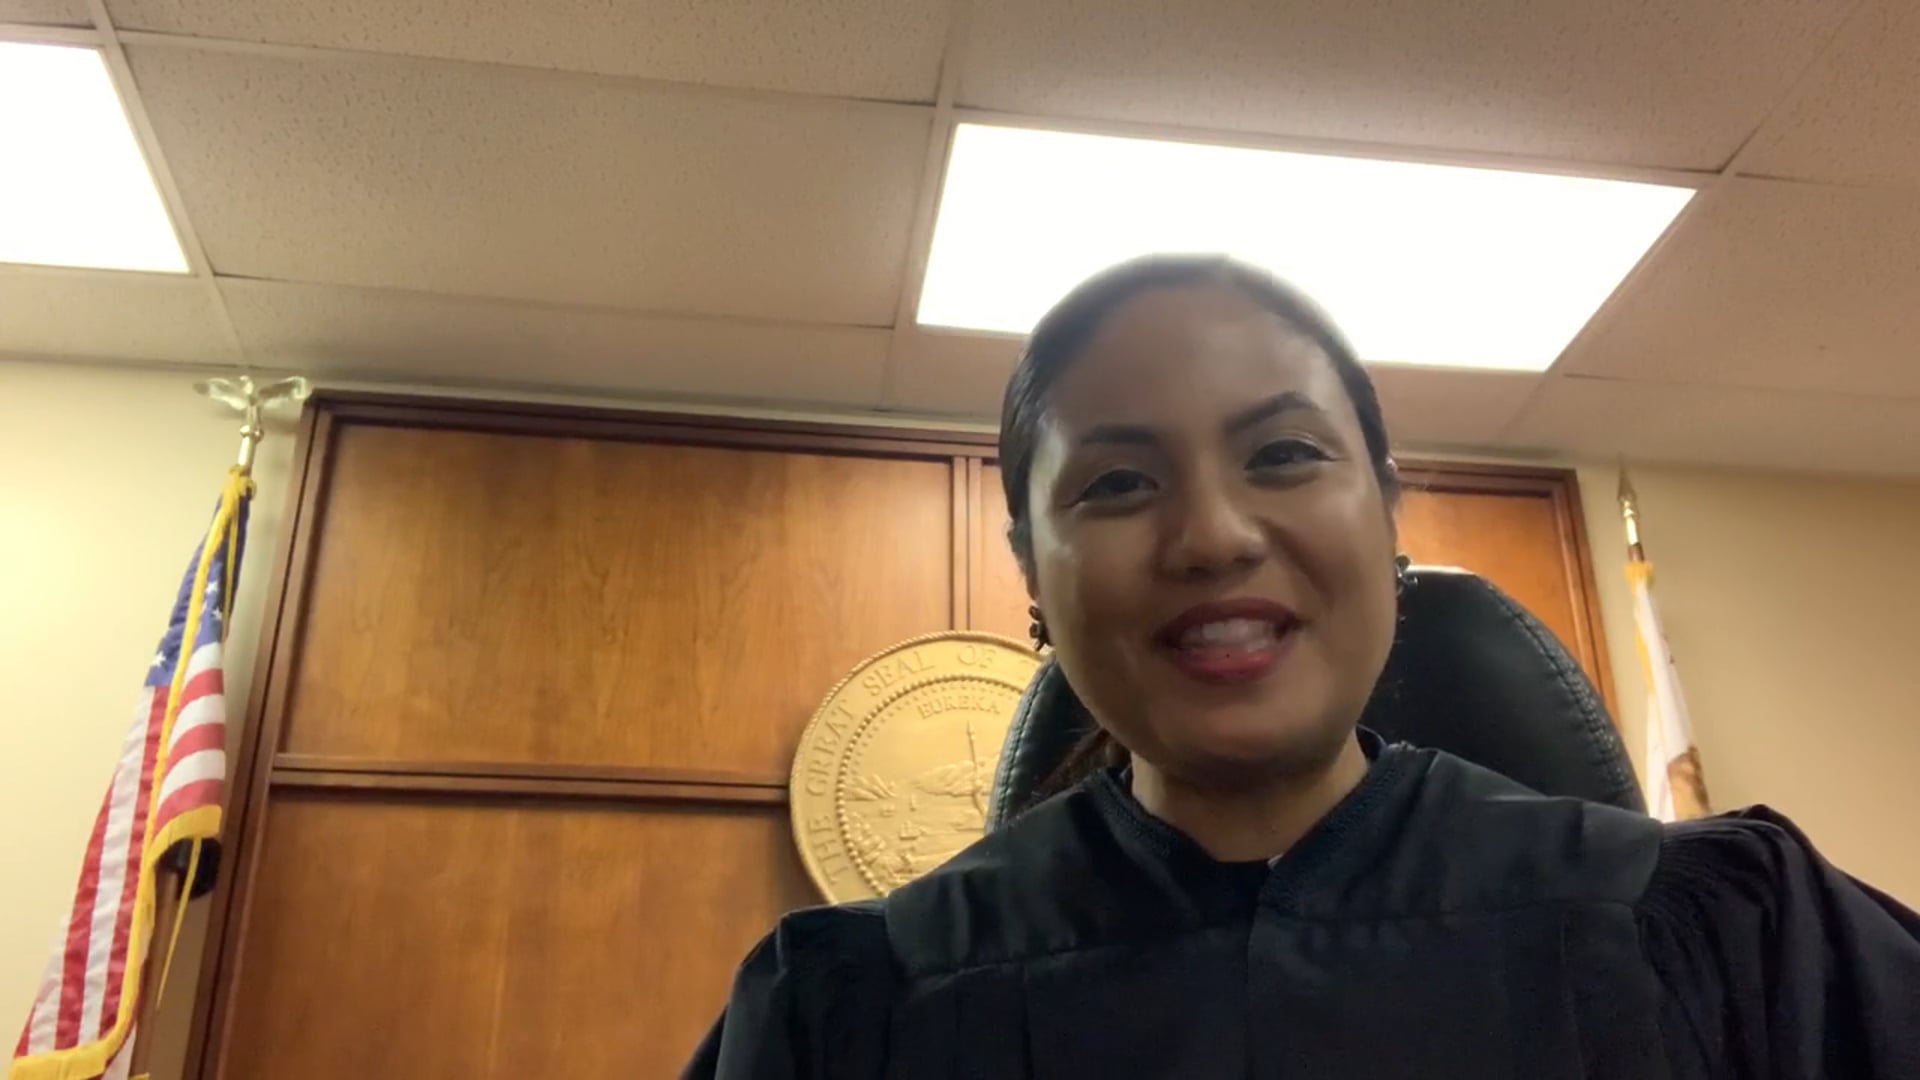 Judge Zapanta gives her take on the 14th Amendment and what it means in her courtroom.